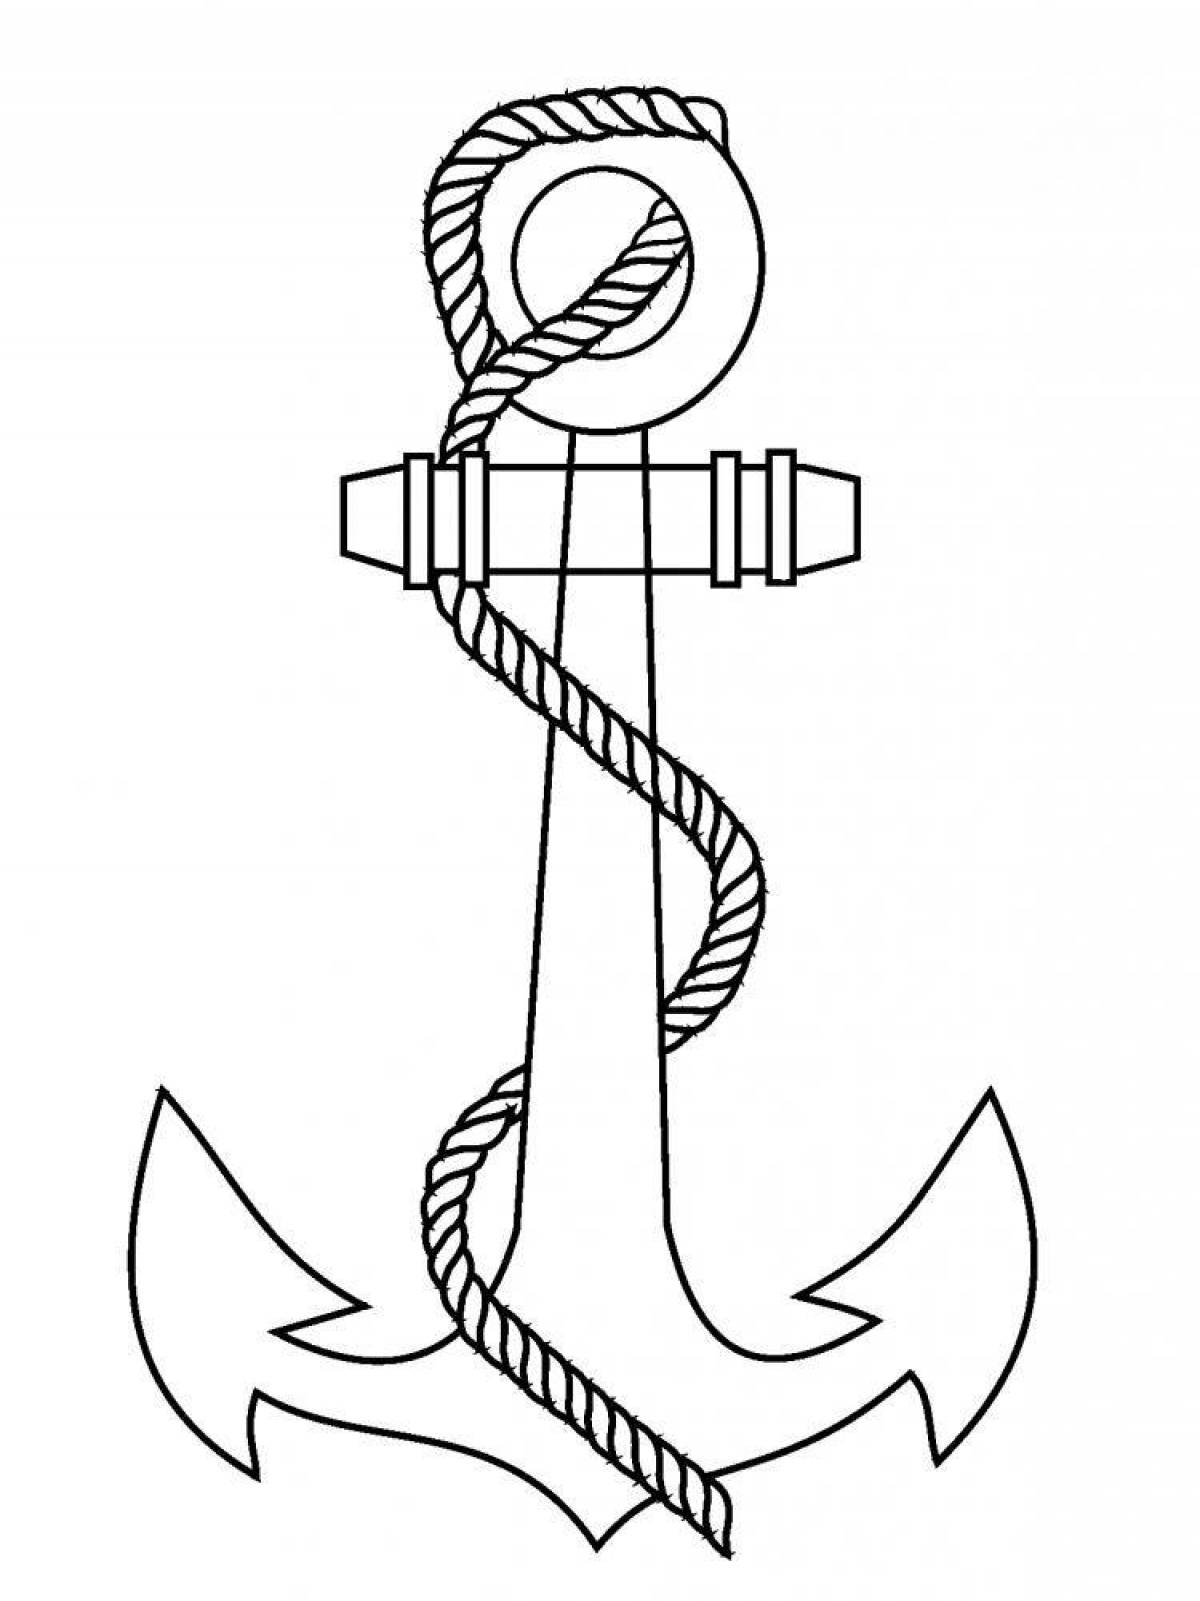 Creative anchor coloring for kids